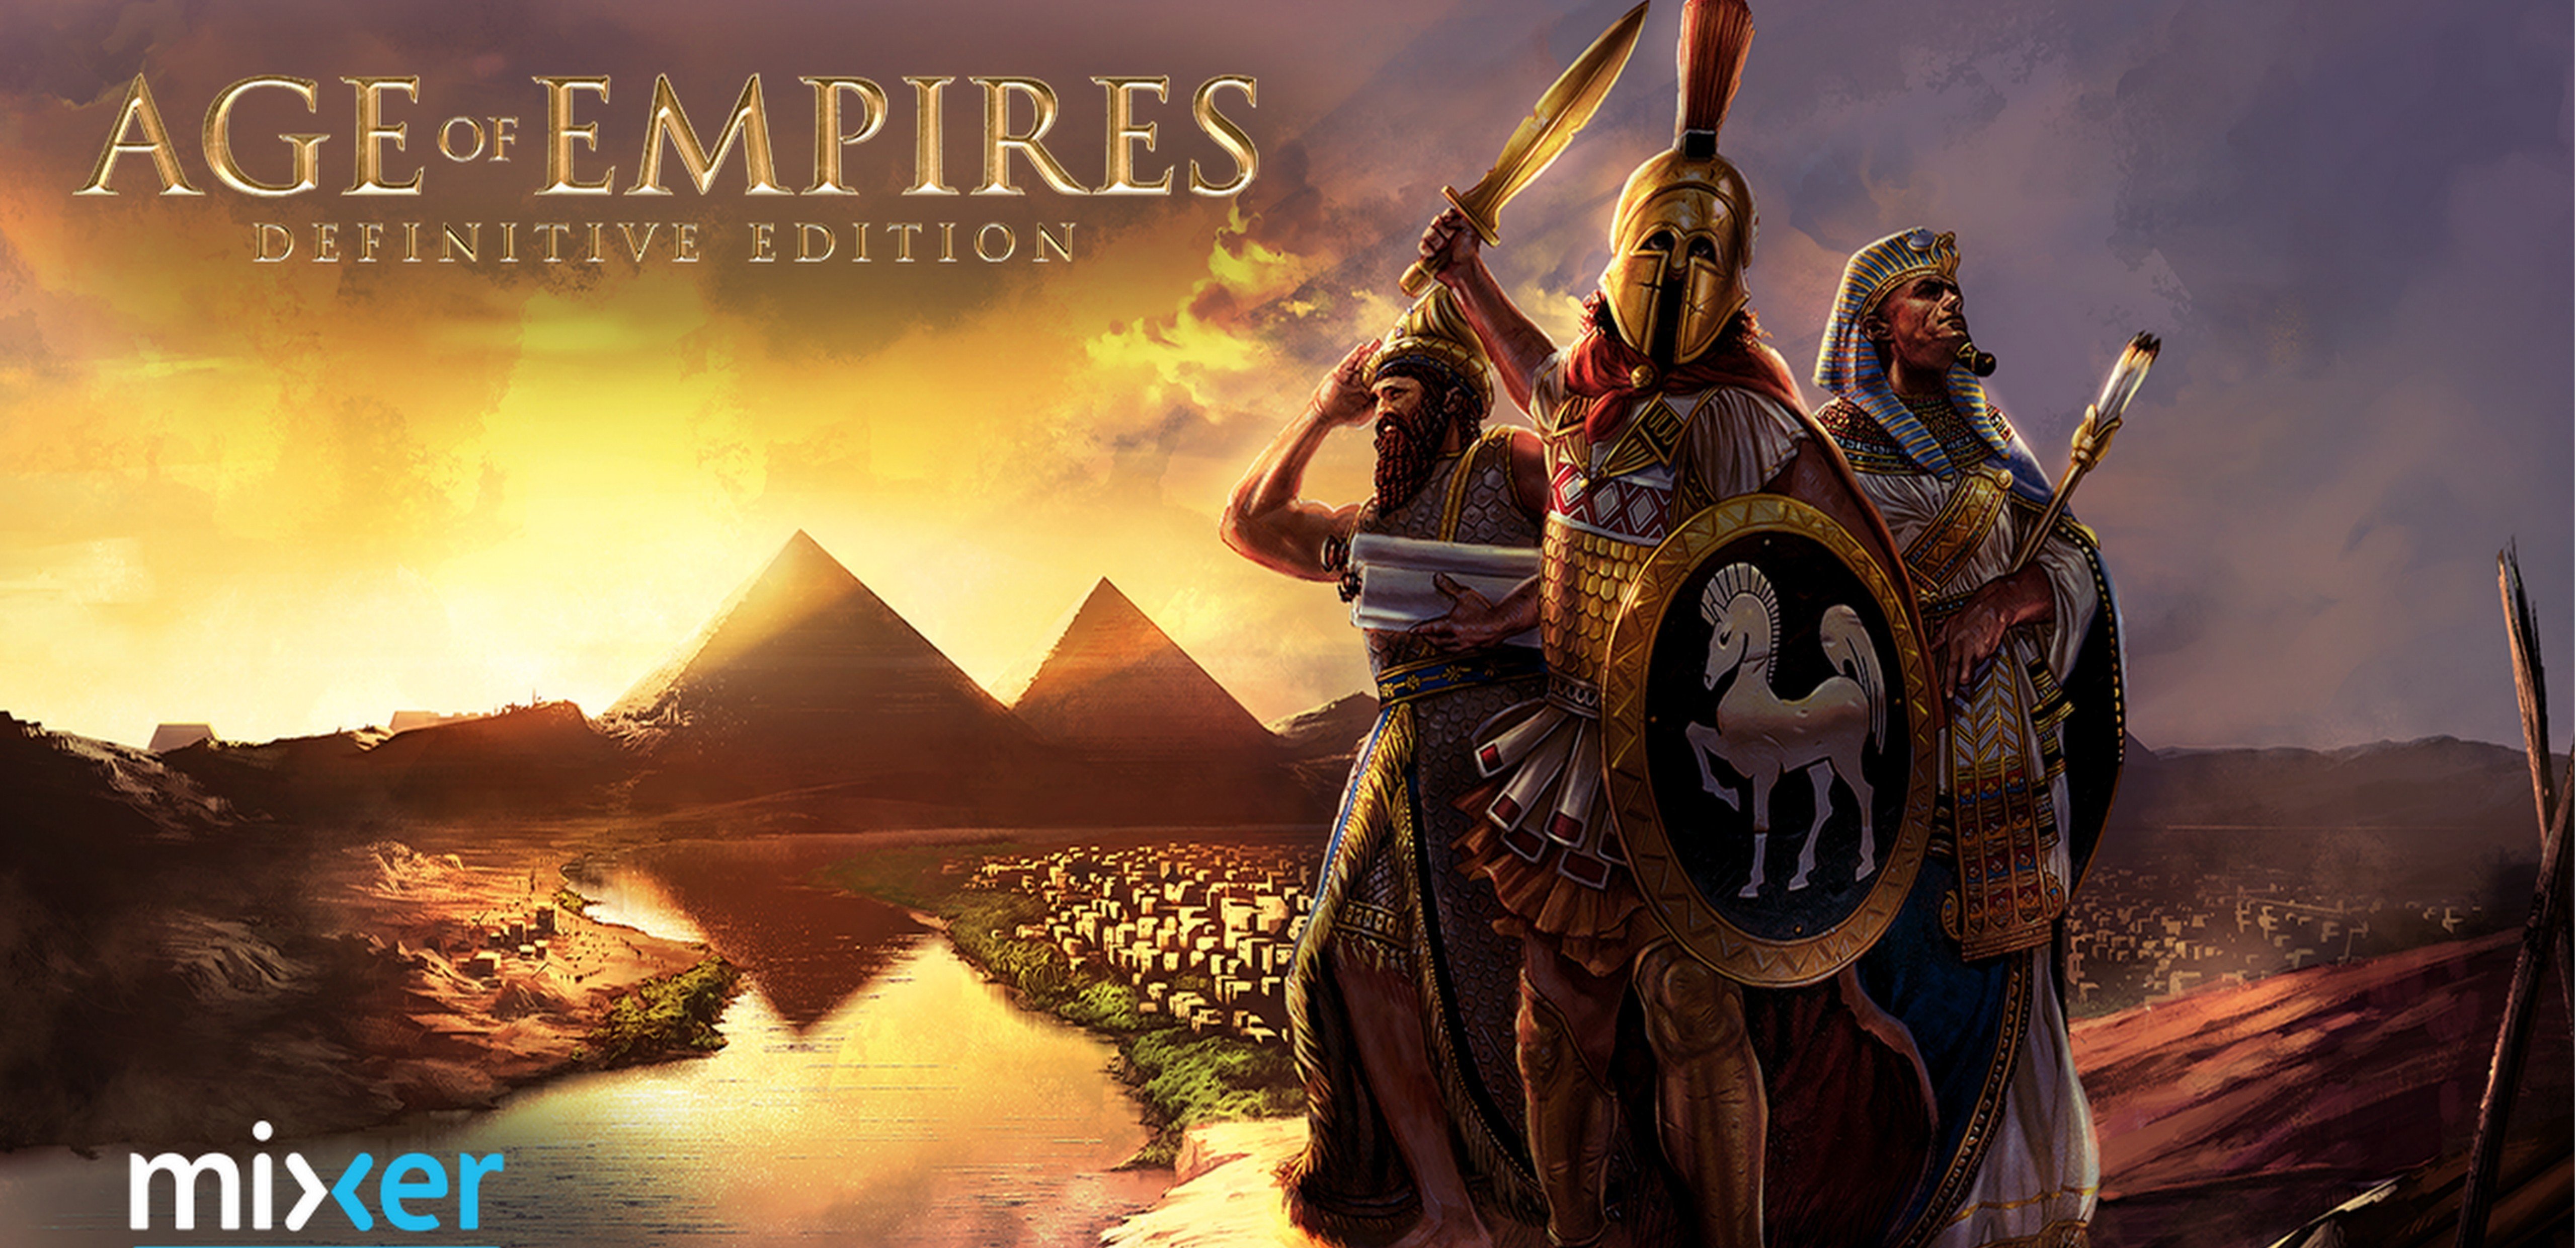 age of empires 1 soundtrack download free